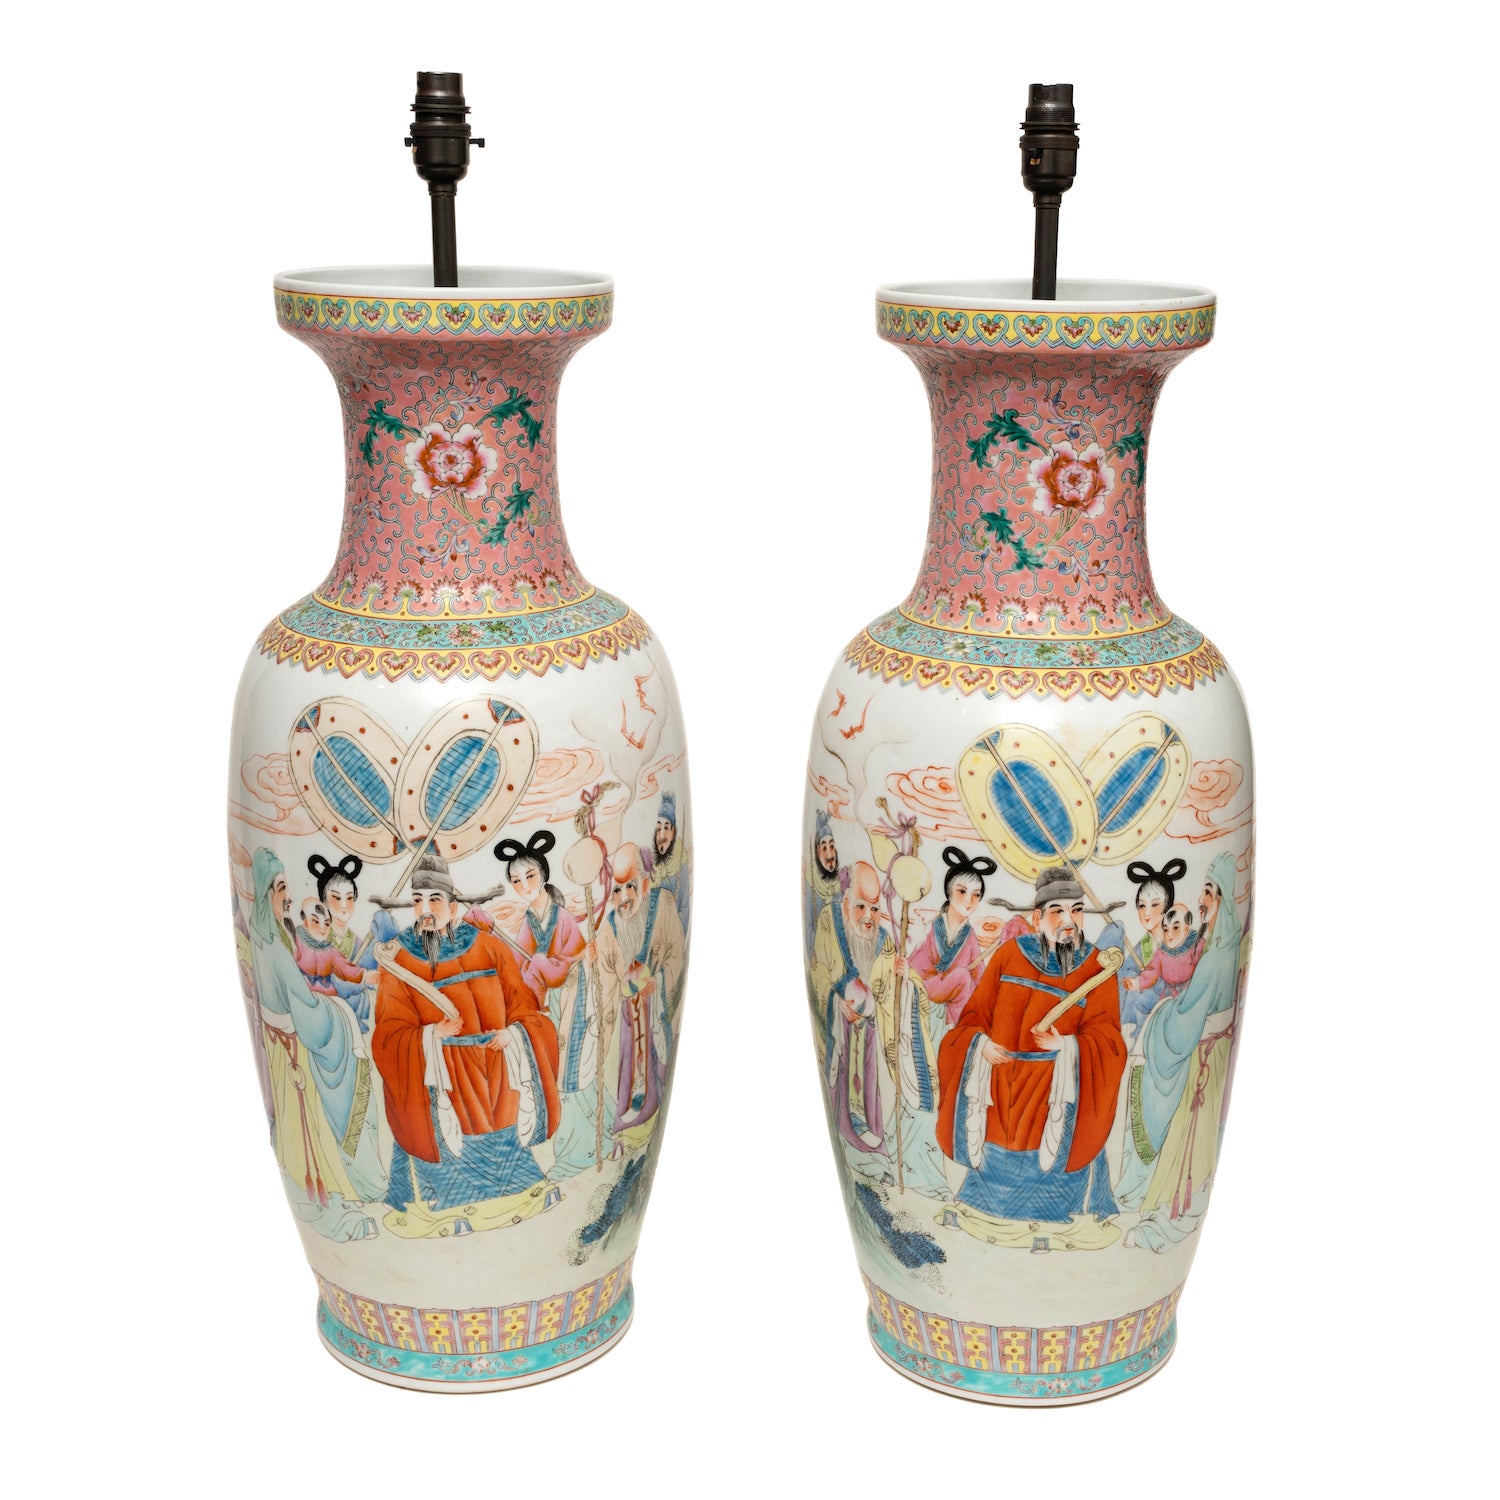 Vases Pair Chinoiserie Porcelain Ceremony Pastel Pink Yellow Blue Gree 27.5"high For Sale